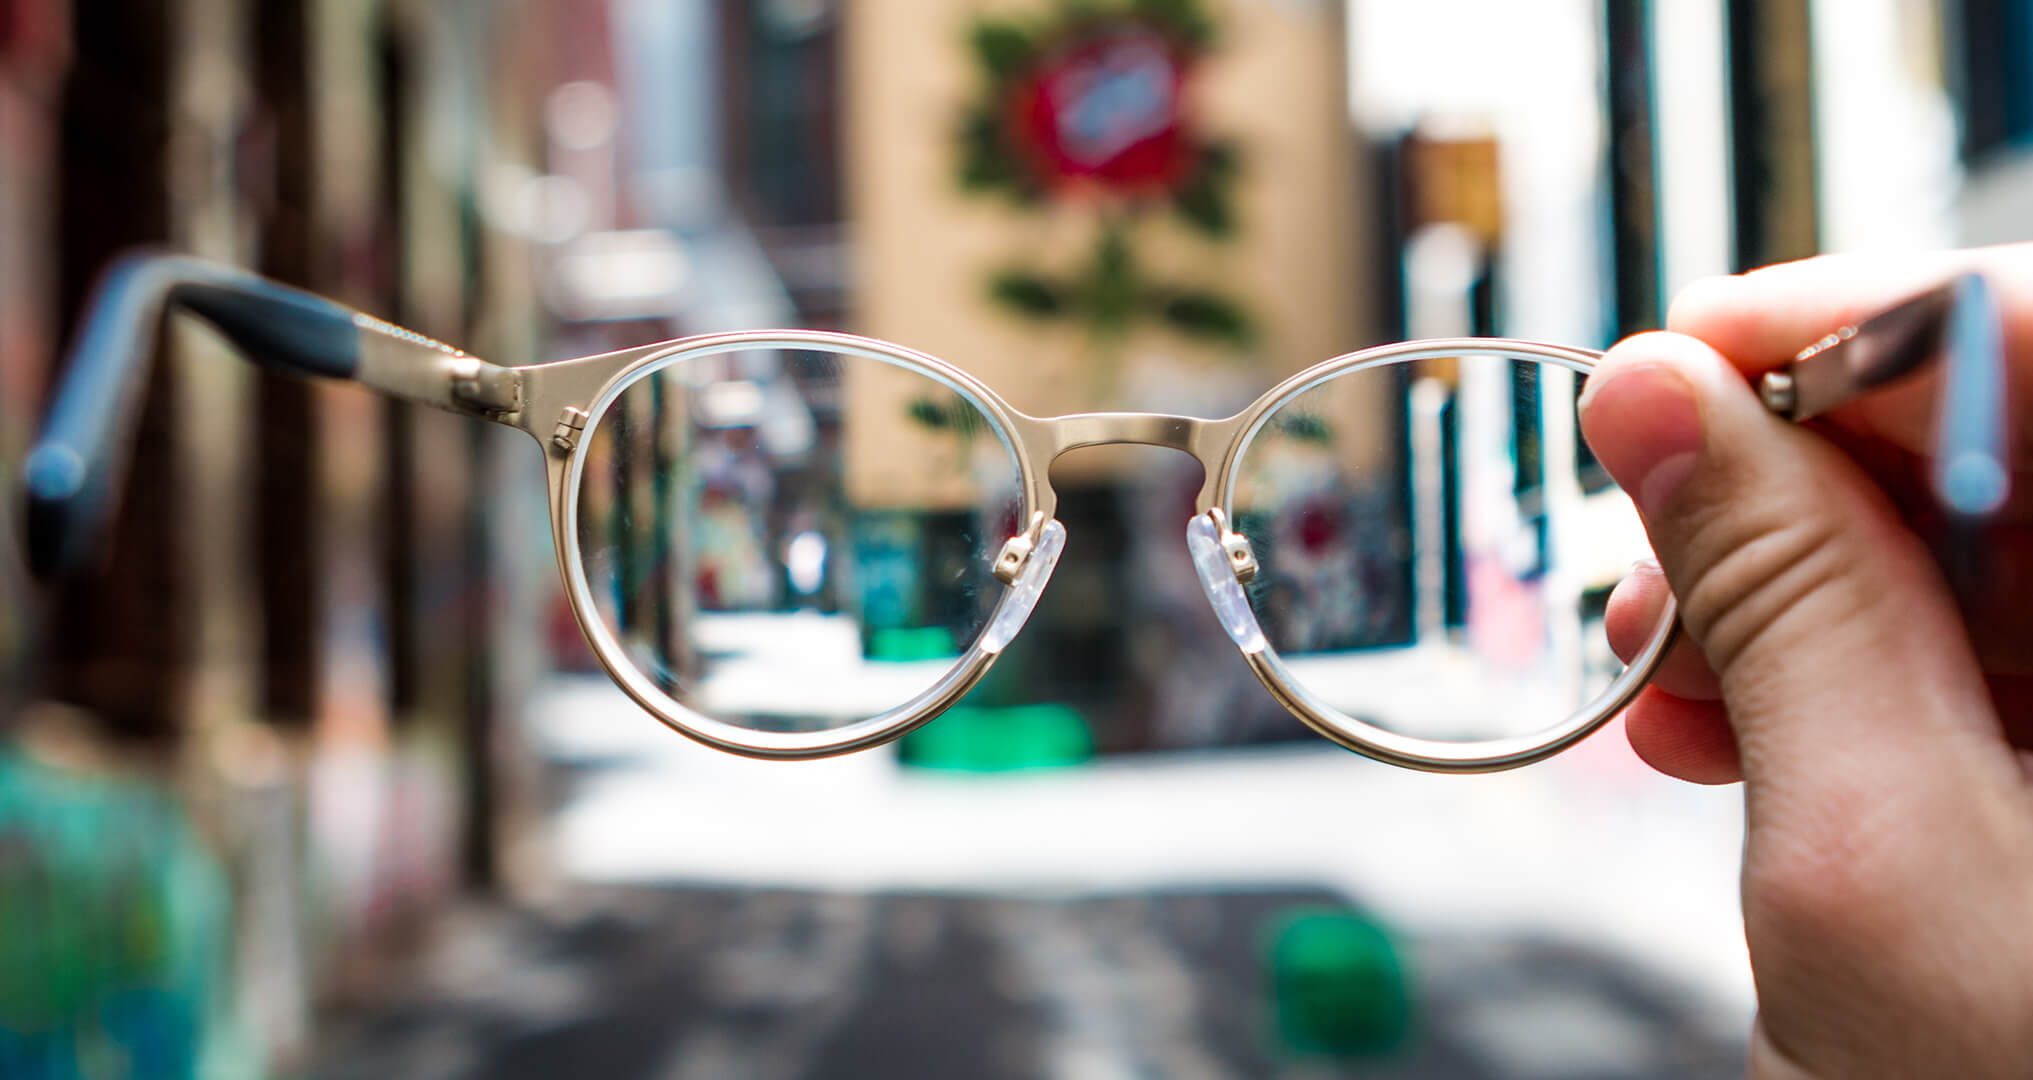 Person holding glasses out showing blurred city image